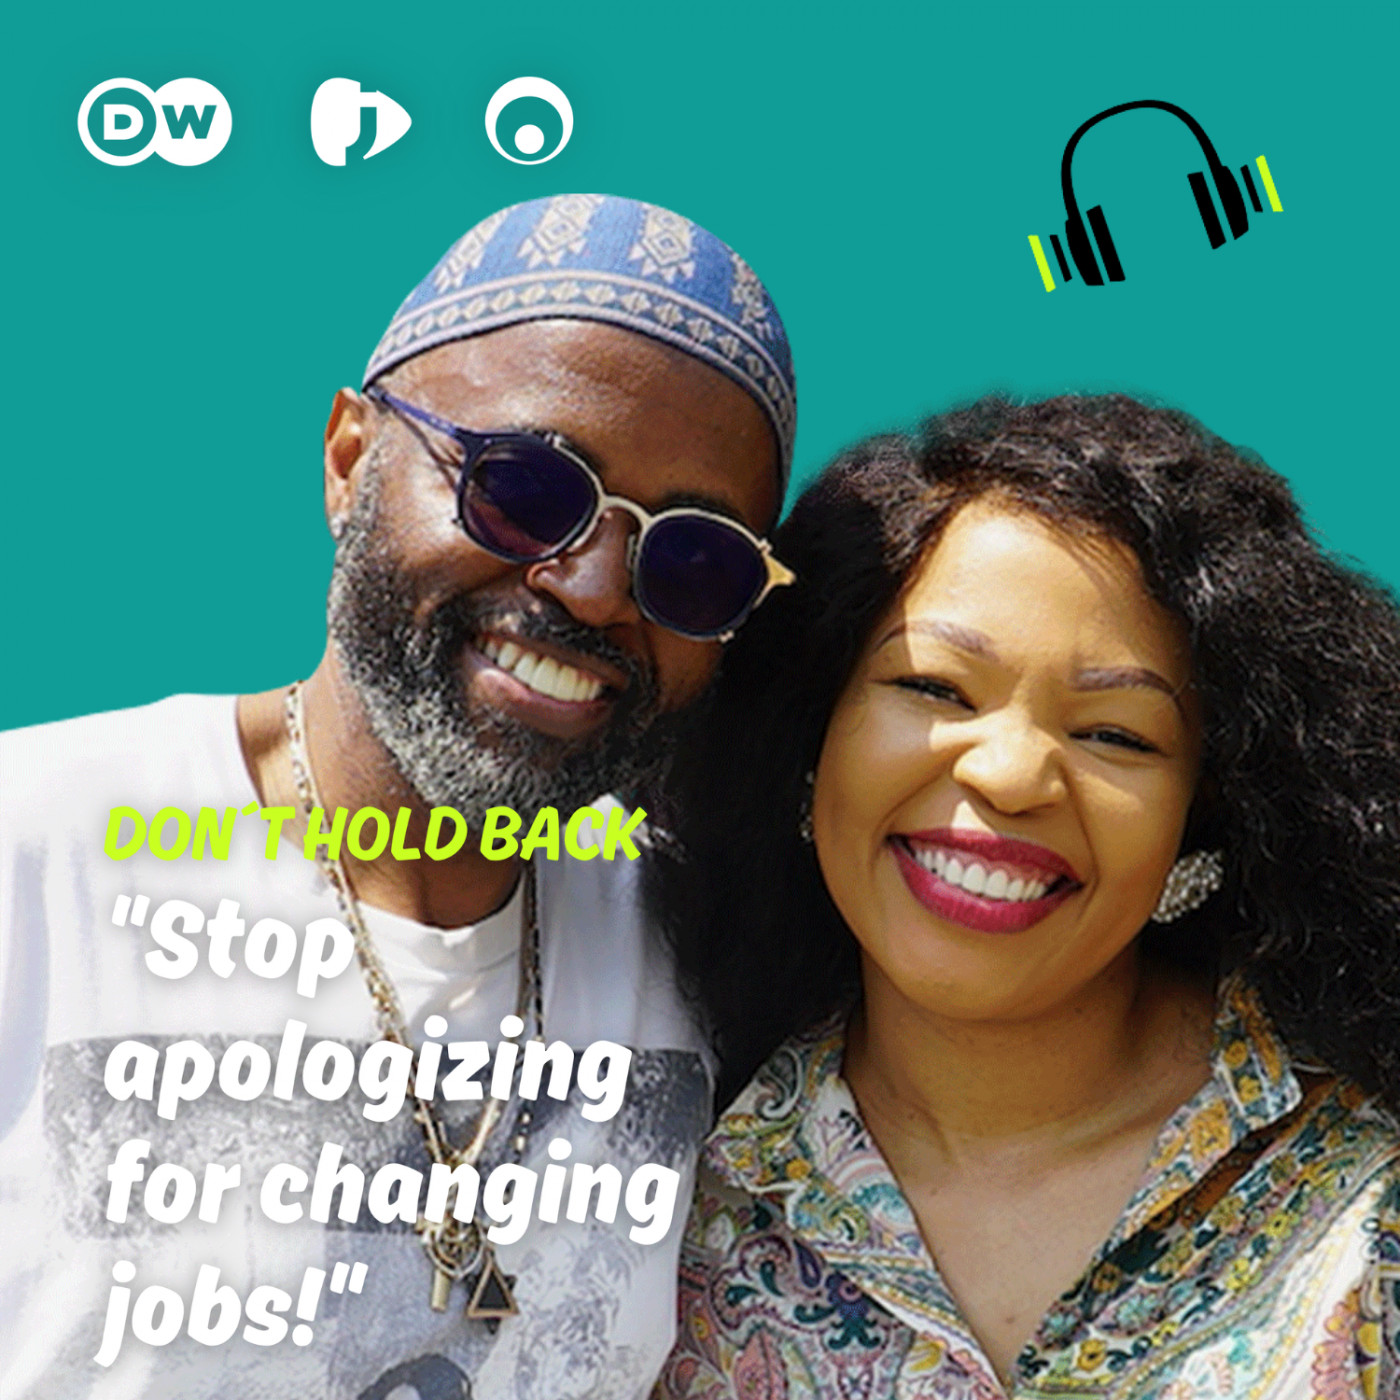 Stop apologising for changing jobs! - Mzamo Masito